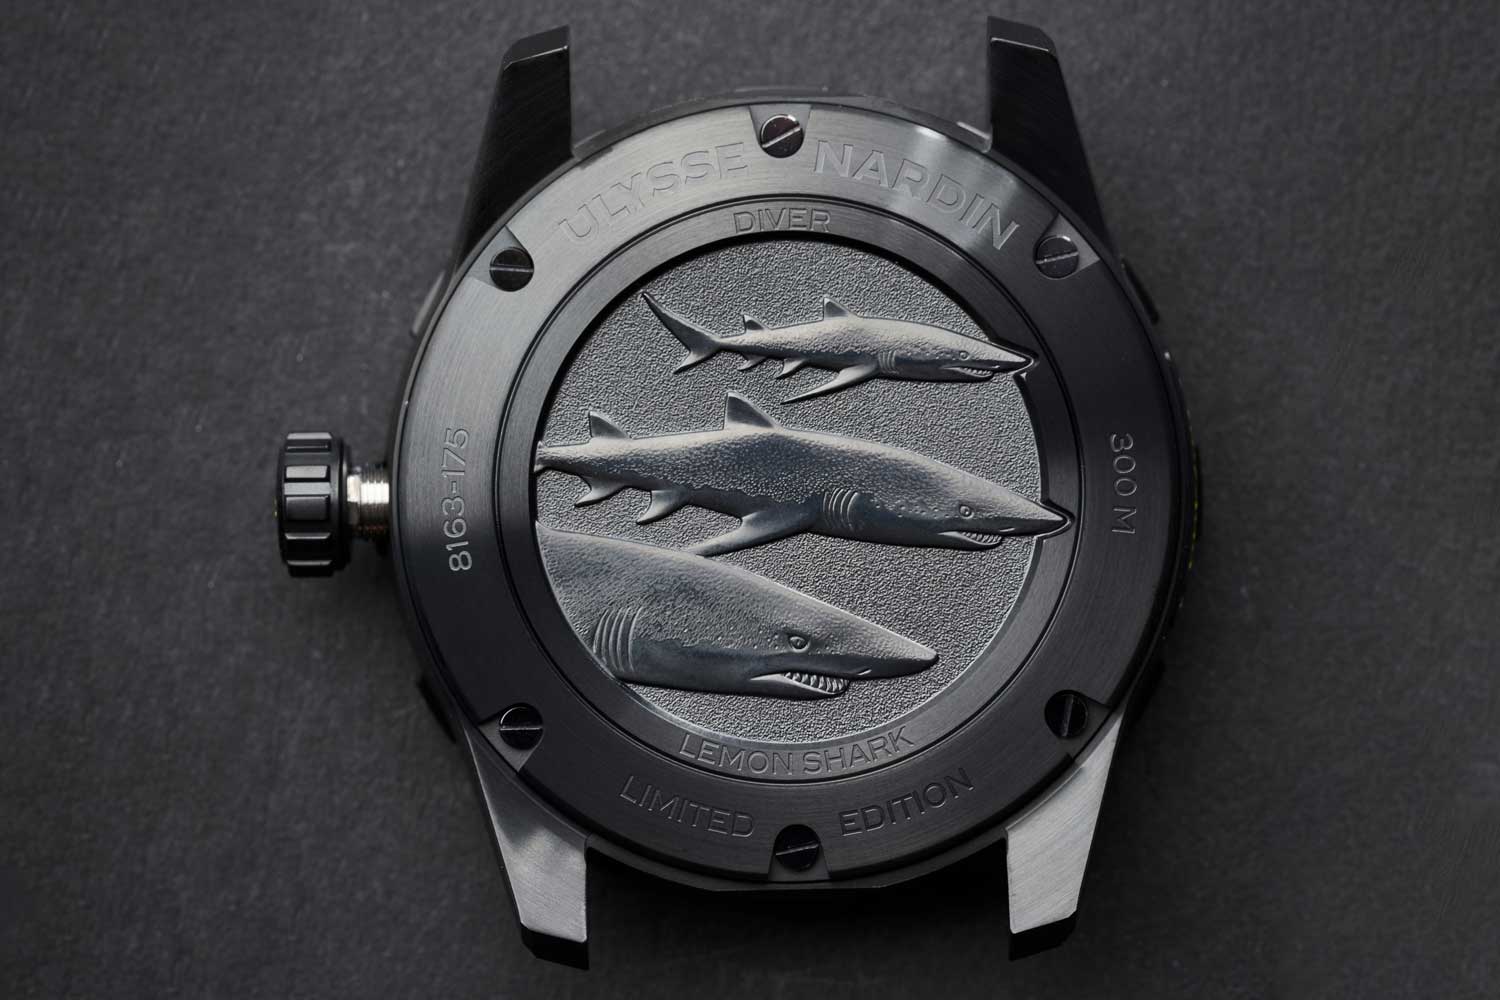 The solid caseback features a highly detailed and textured engraving of three lemon sharks